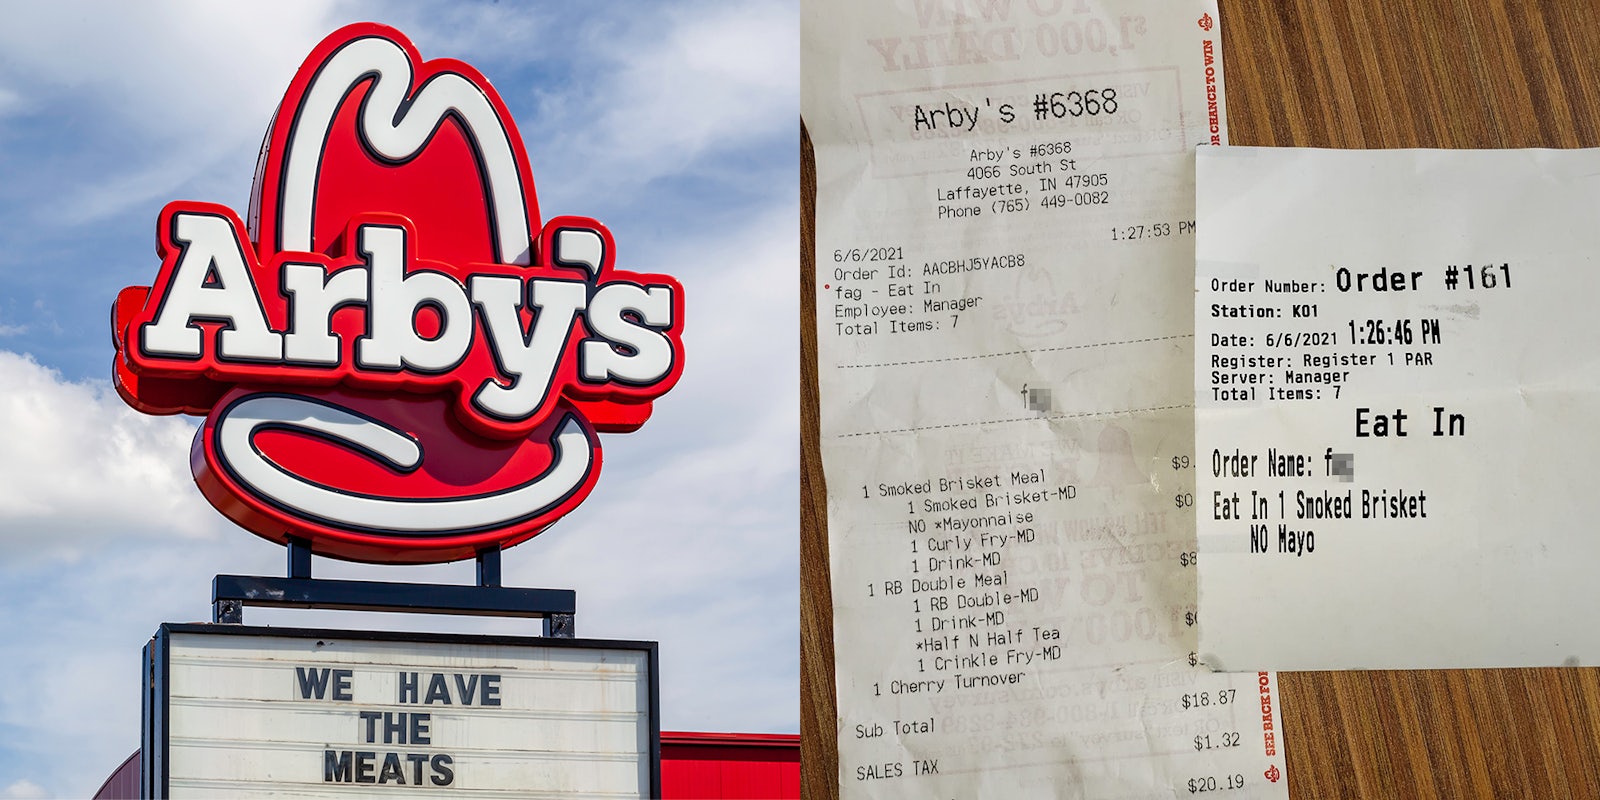 Arby's sign 'We have the meats' (l) Arby's receipt with homosexual slur